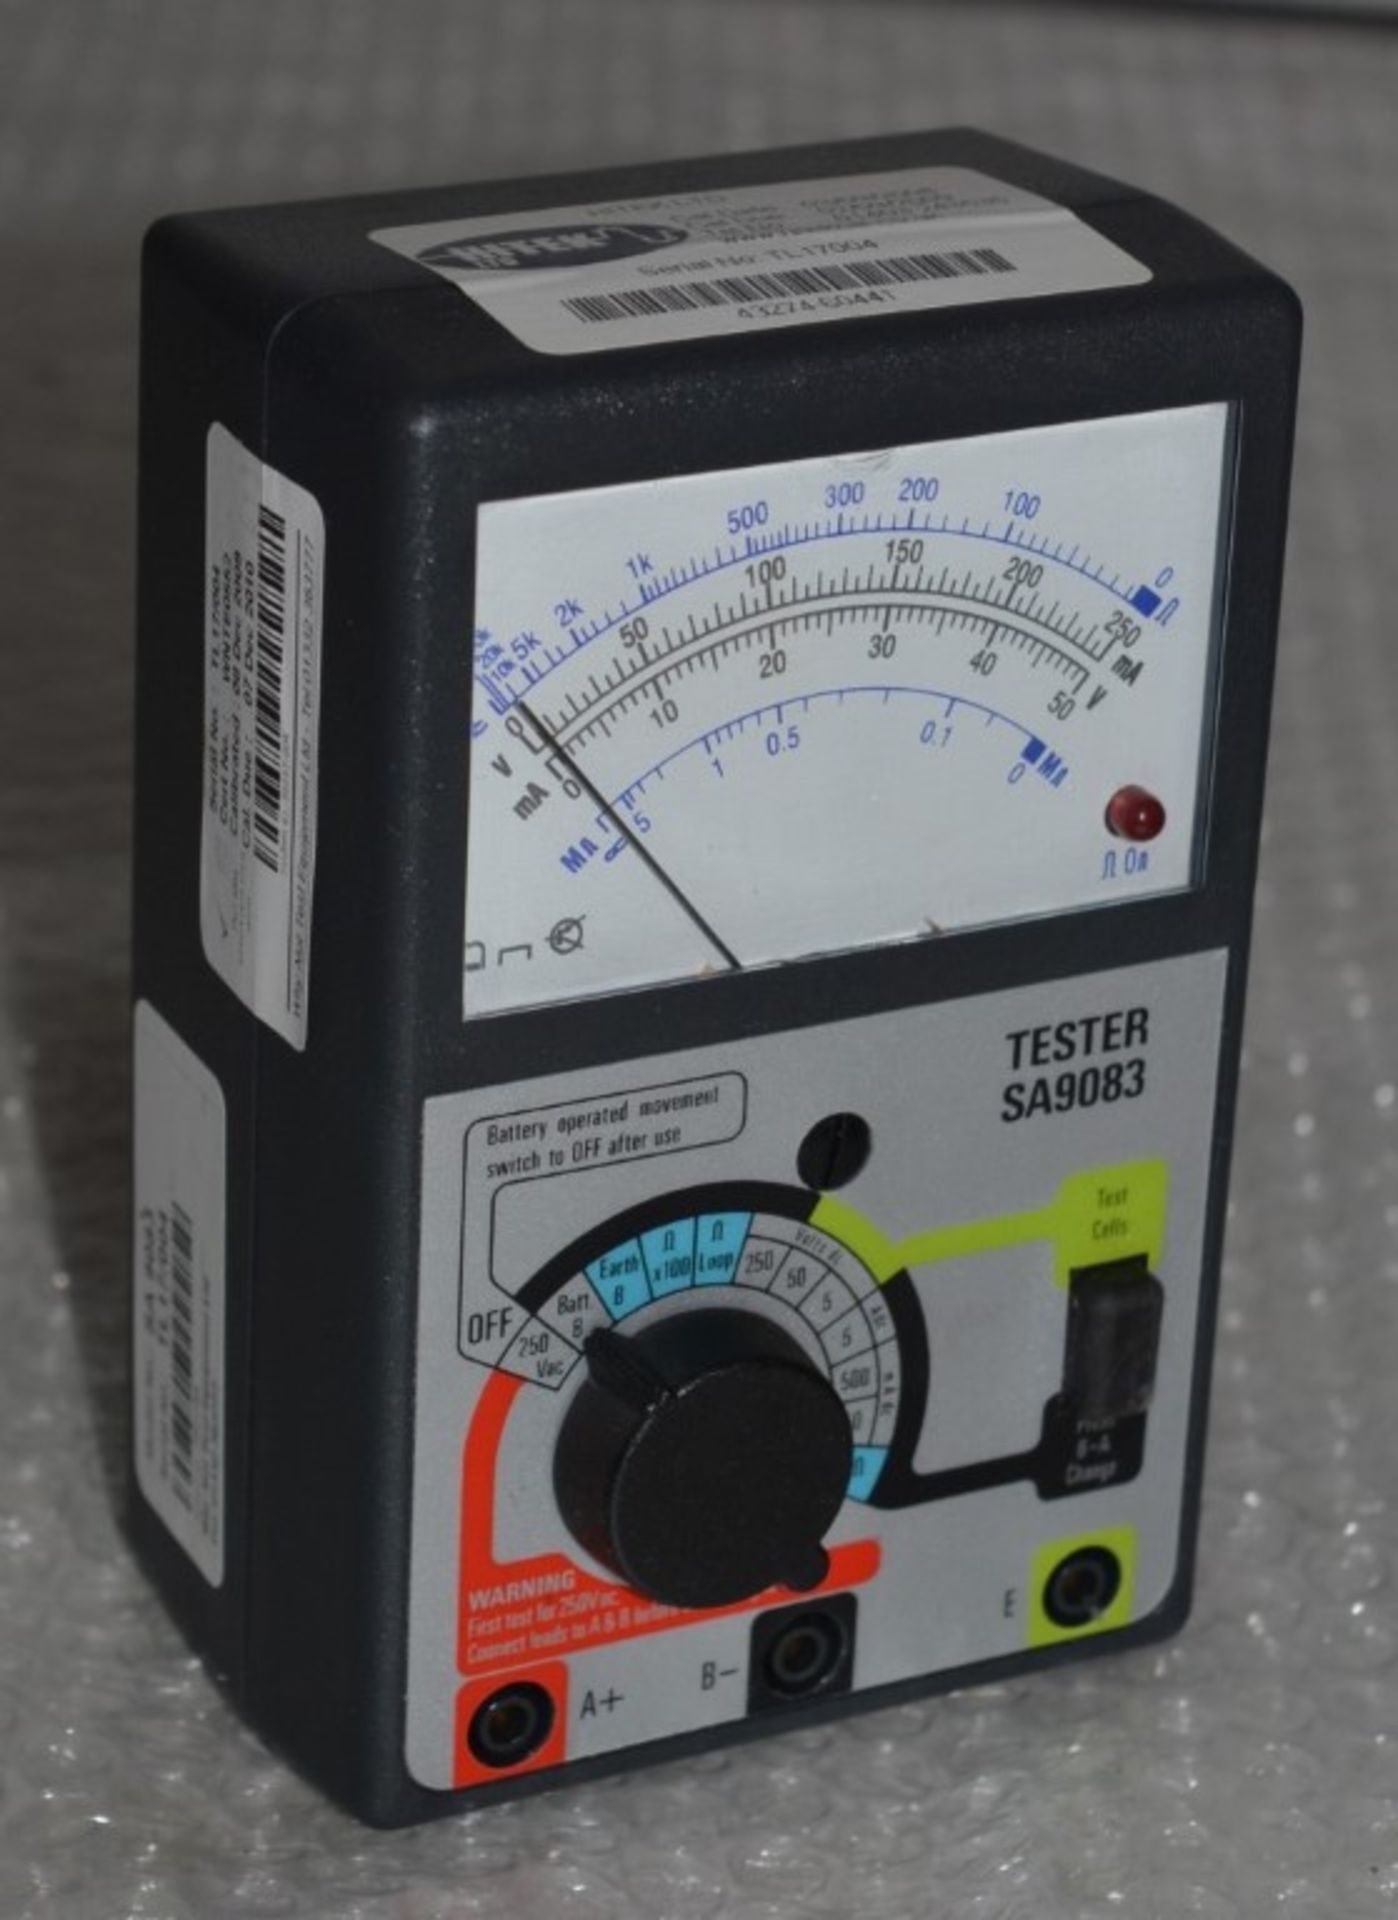 1 x Mills SA9083 Multimeter - Suitable For Telephone Engineers in Maintenance Testing - With Carry - Image 3 of 16